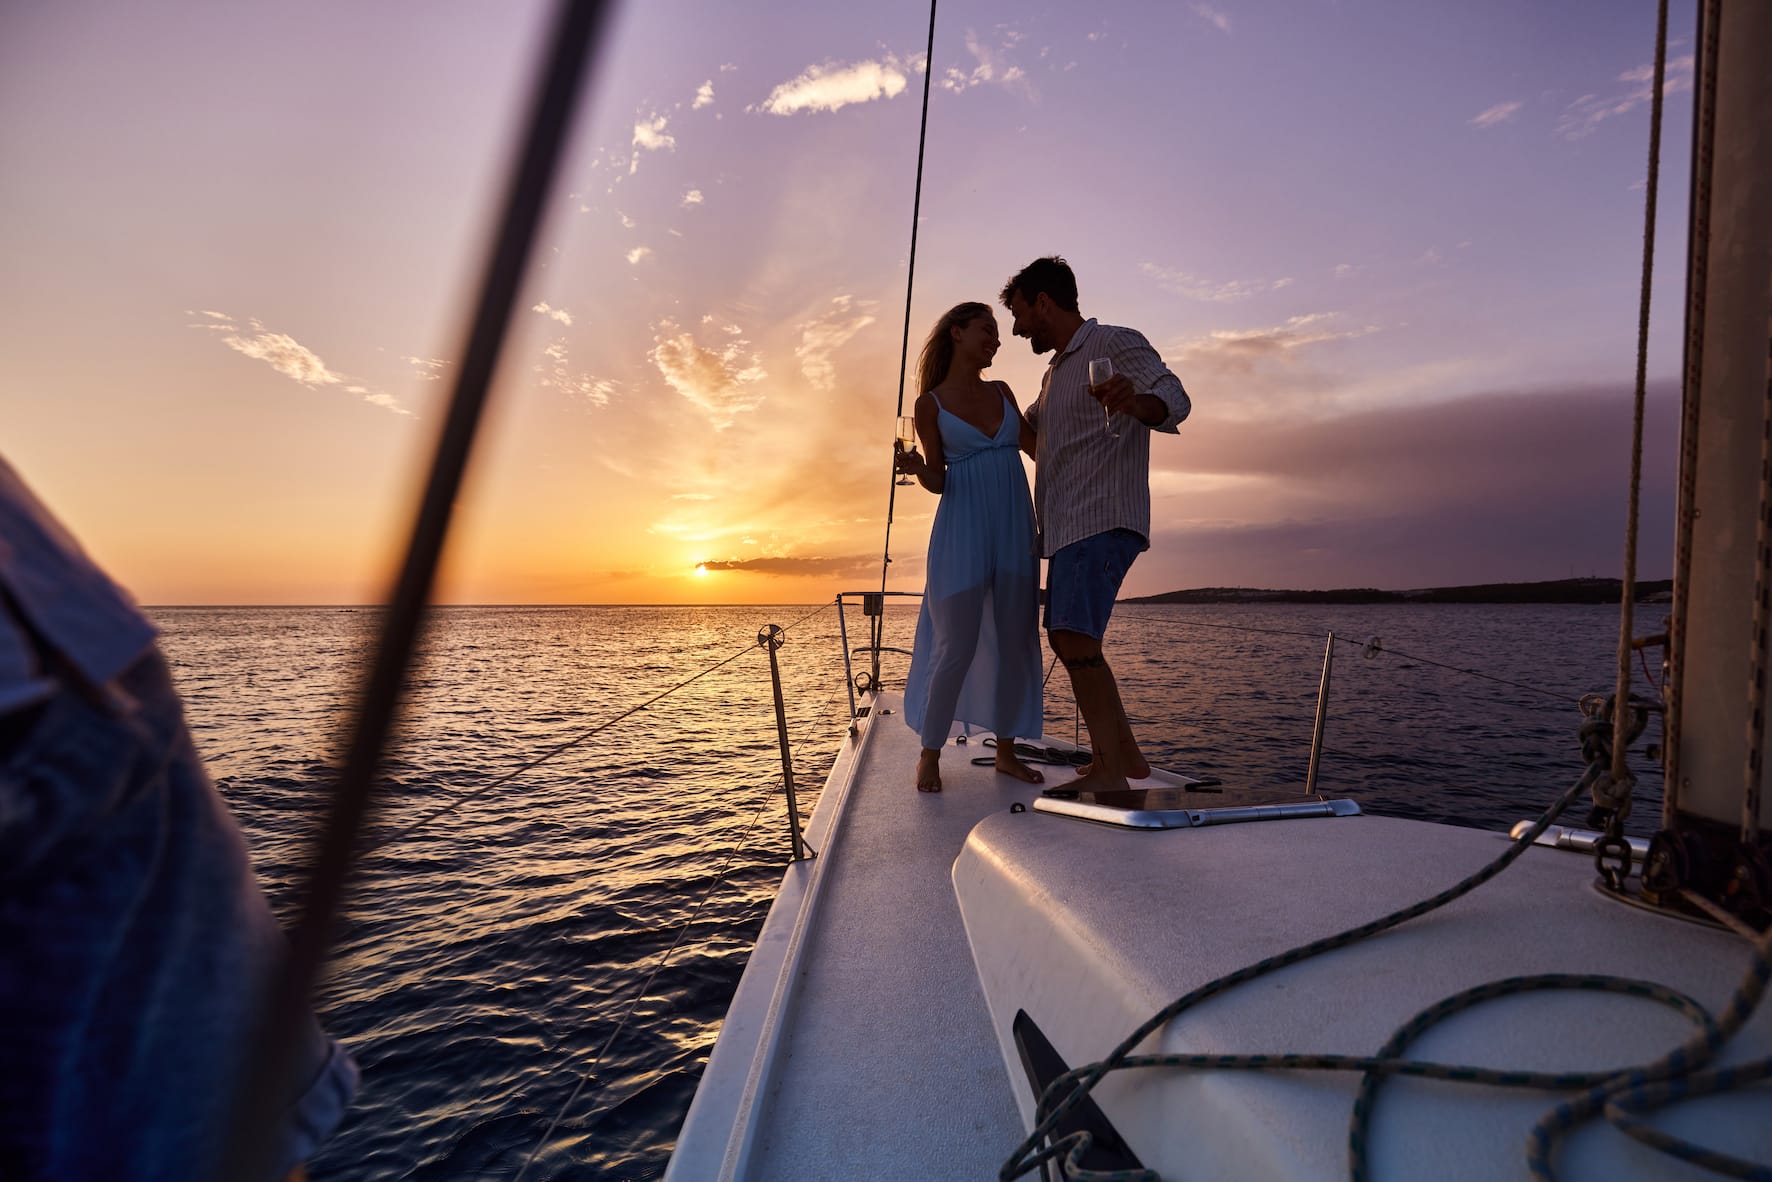 Couple enjoying sunset on a sailing boat with glass of wine in hand.